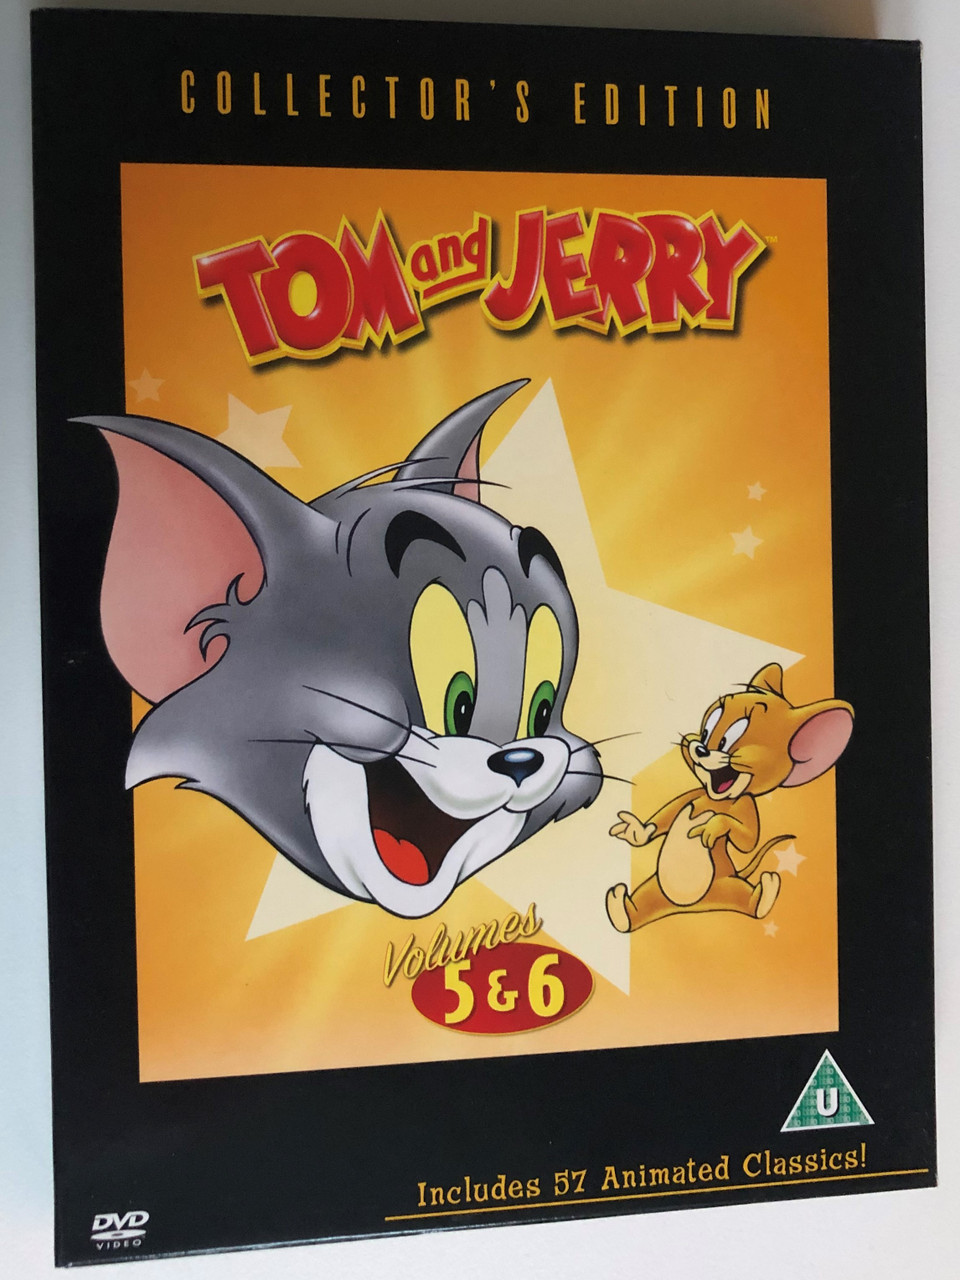 hjørne Forge Cordelia Tom and Jerry - Volumes 5 & 6 DVD Collector's Edition / Directed by William  Hanna, Joseph Barbera / Includes 57 Animated Classics! - bibleinmylanguage